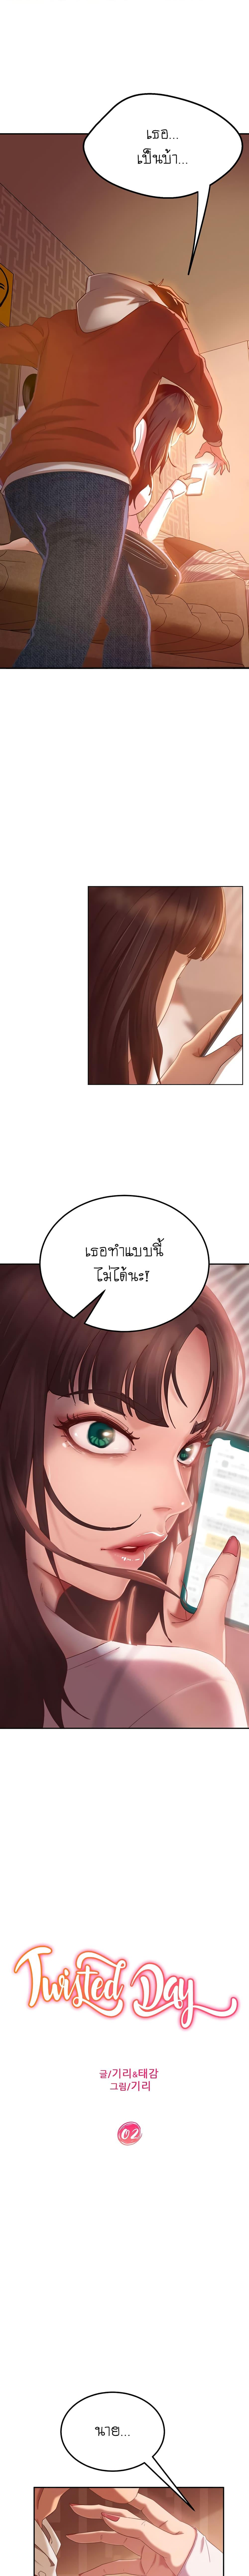 A Twisted Day 2 ภาพ 0